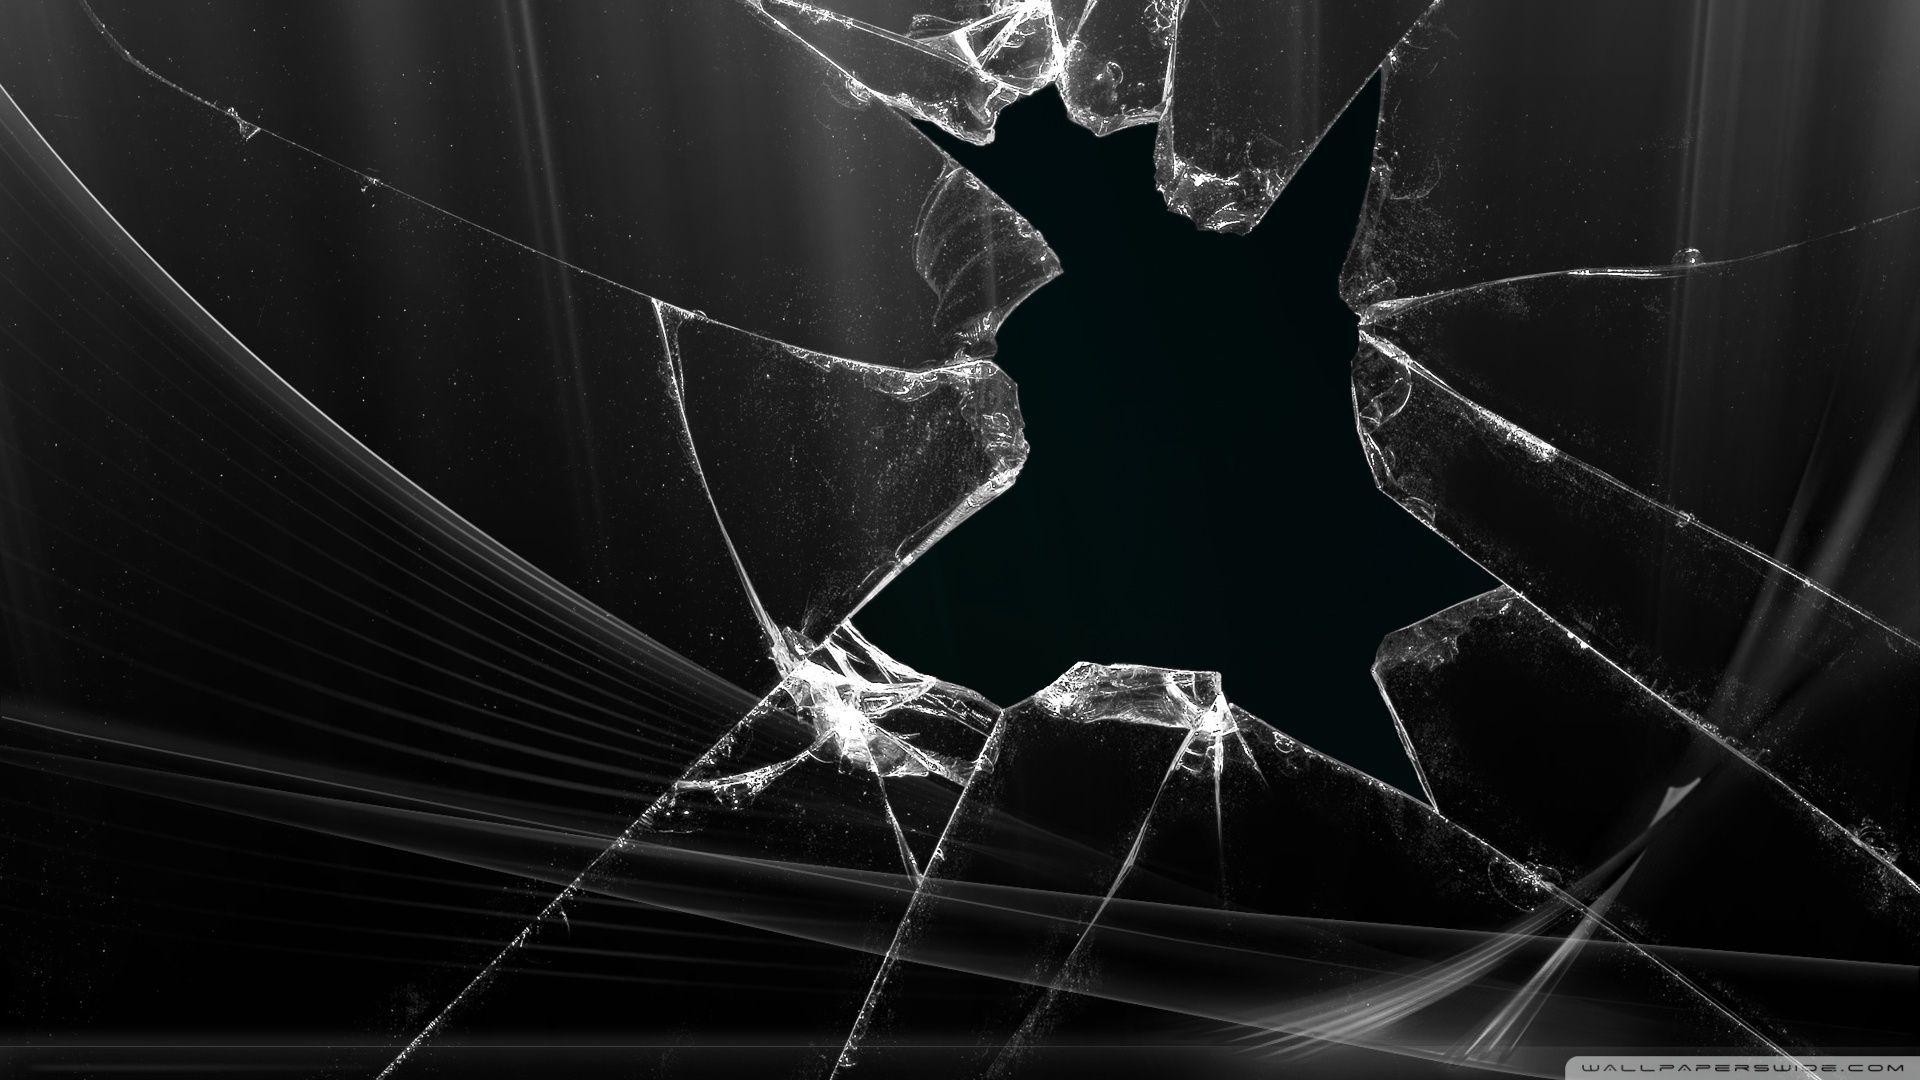 1320 Broken Screen Wallpaper 5 of 49  Cracked Glass Effect HD   Android  iPhone HD Wallpaper Background Download HD Wallpapers Desktop  Background  Android  iPhone 1080p 4k 1080x1921 2023